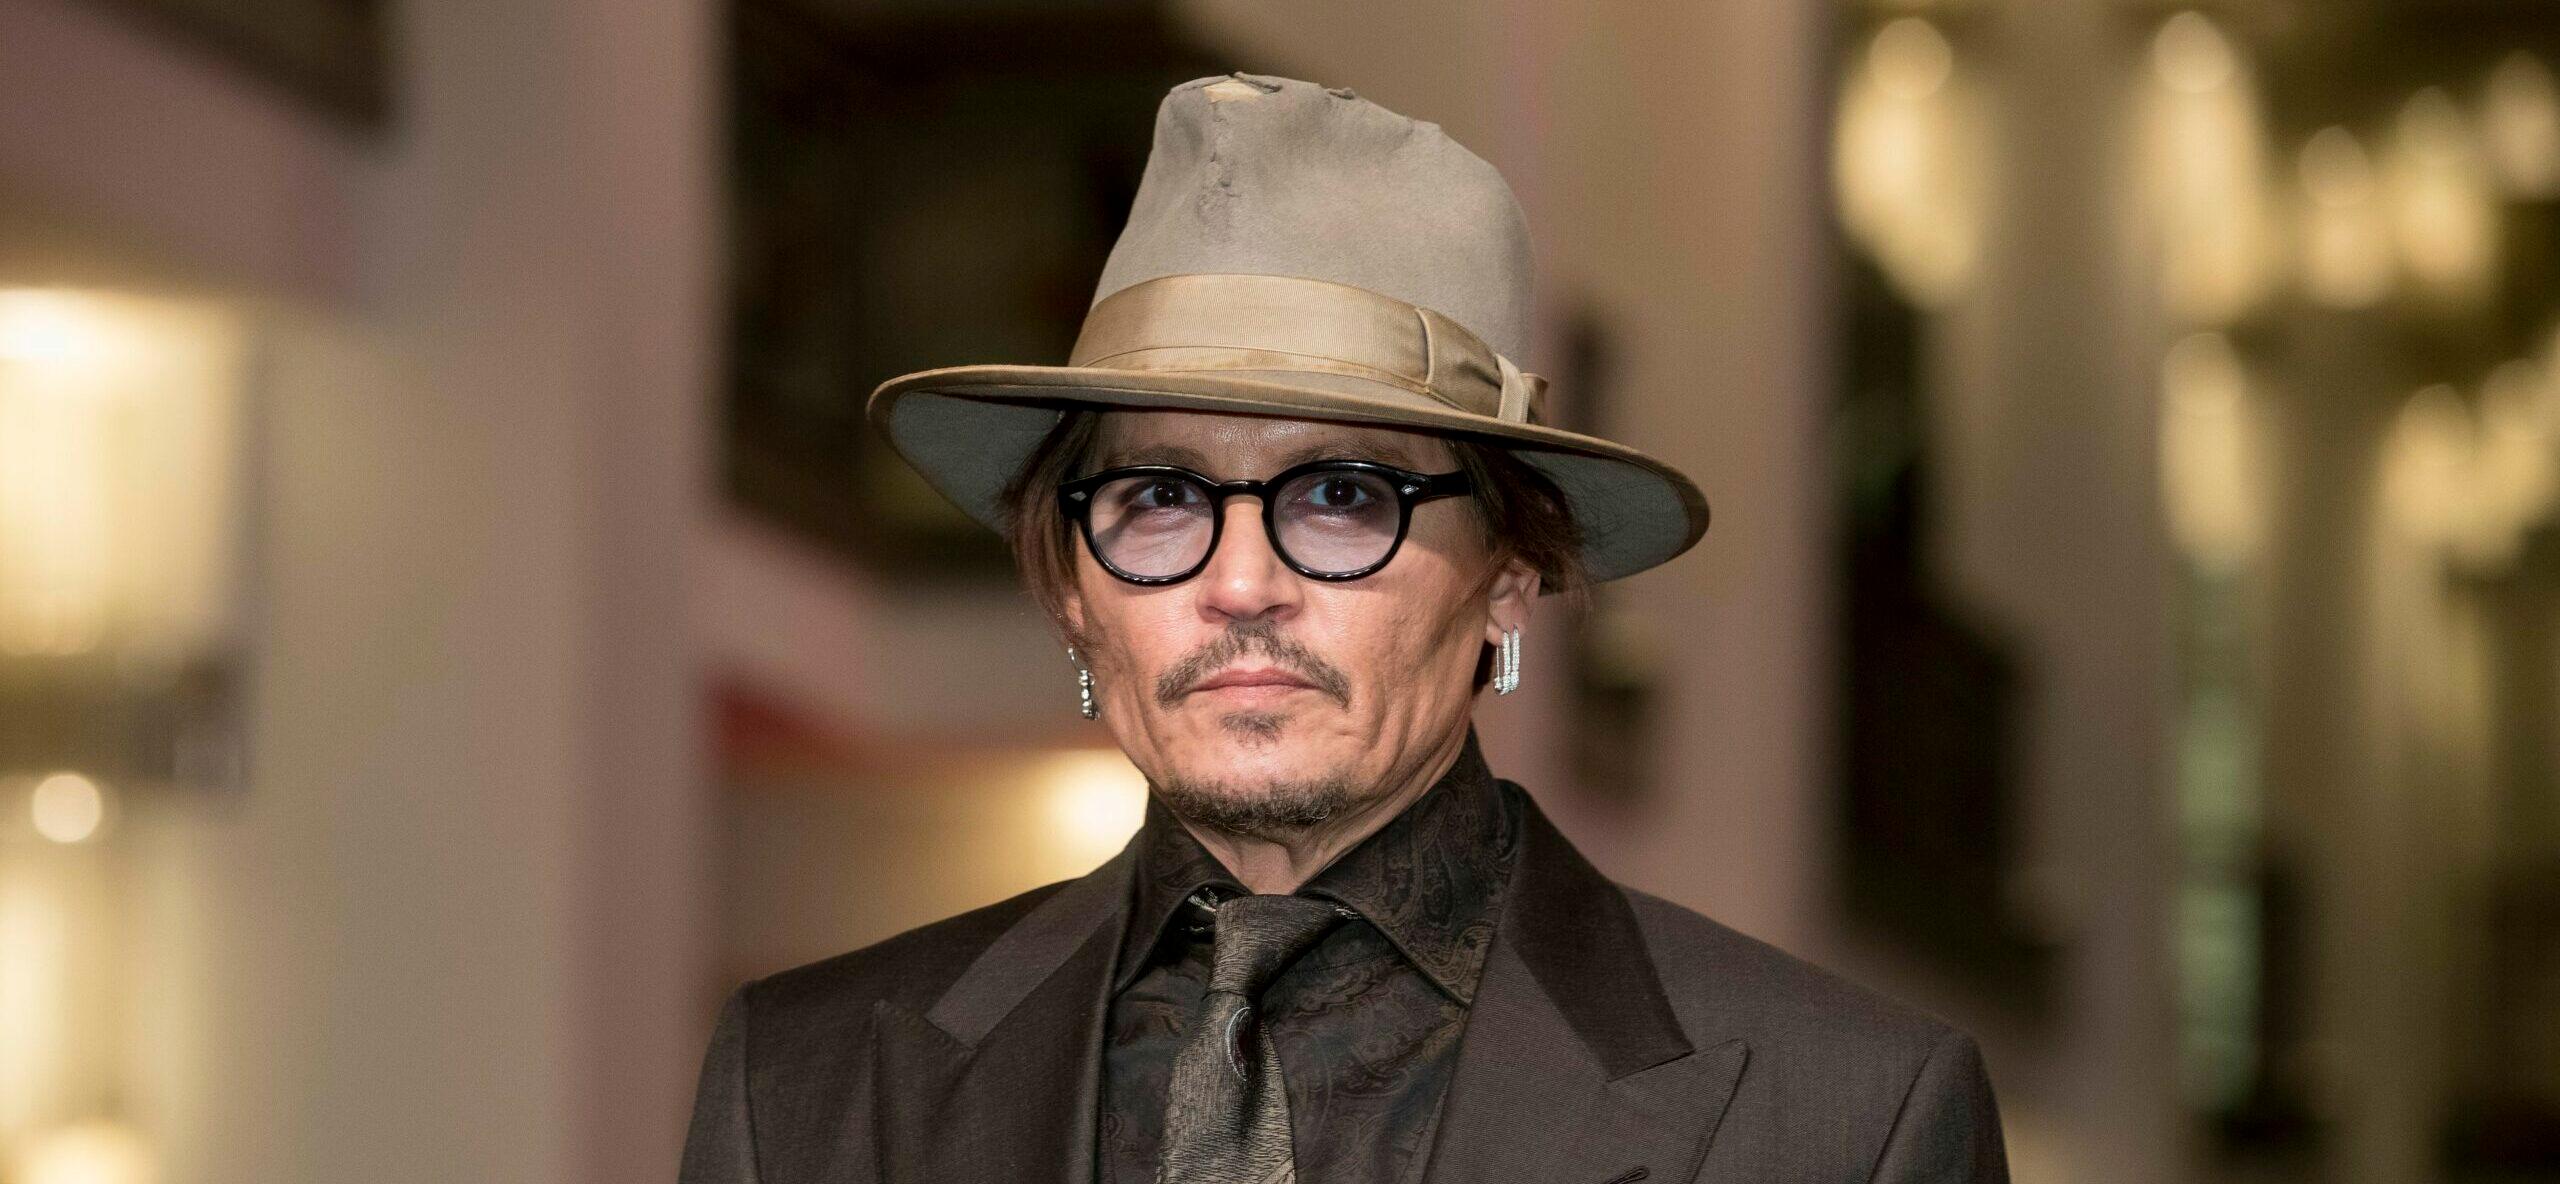 Johnny Depp Delays Tour With His Band After Suffering A ‘Painful’ Ankle Fracture